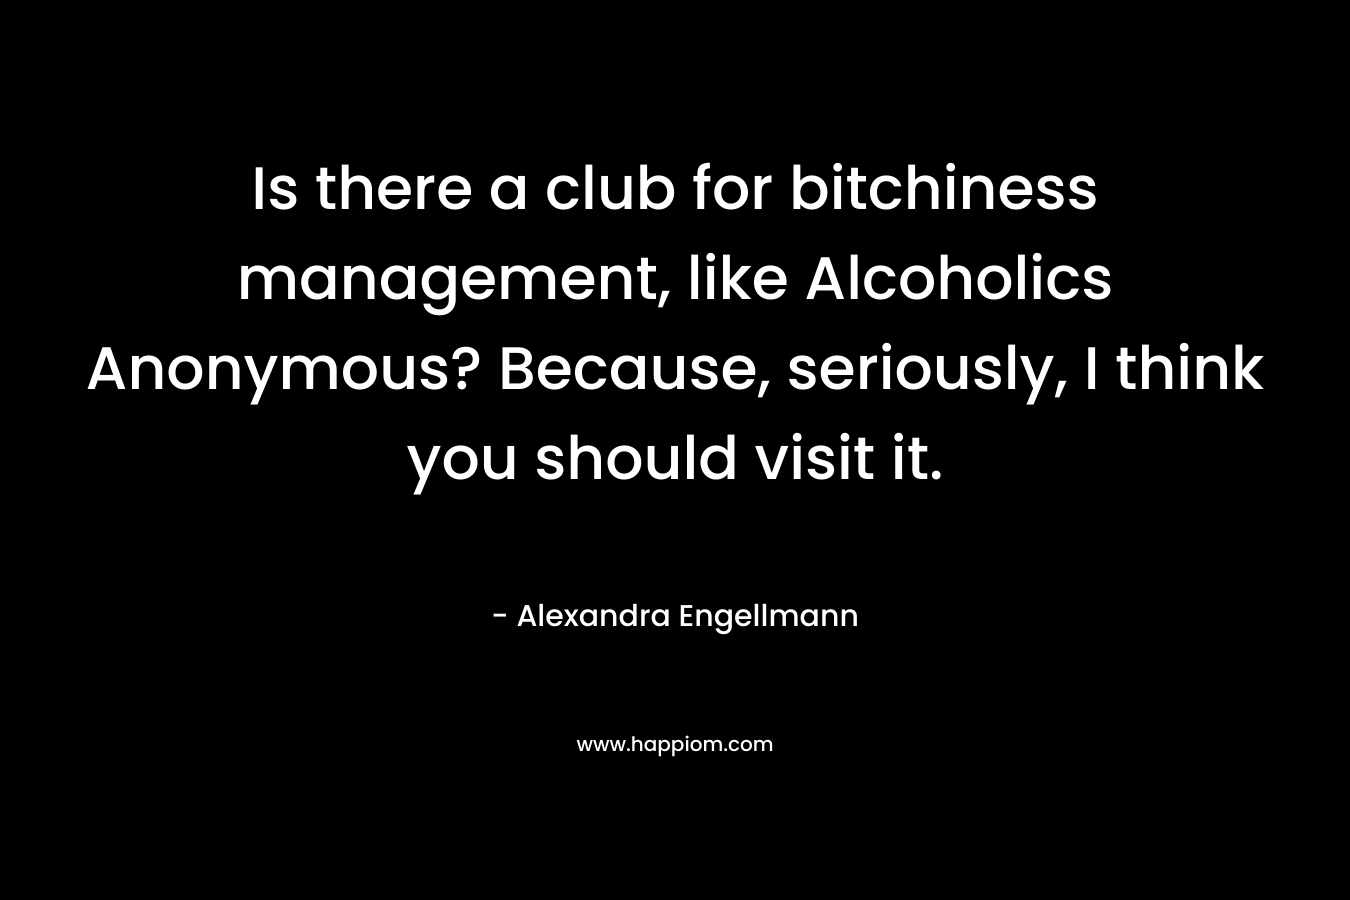 Is there a club for bitchiness management, like Alcoholics Anonymous? Because, seriously, I think you should visit it.